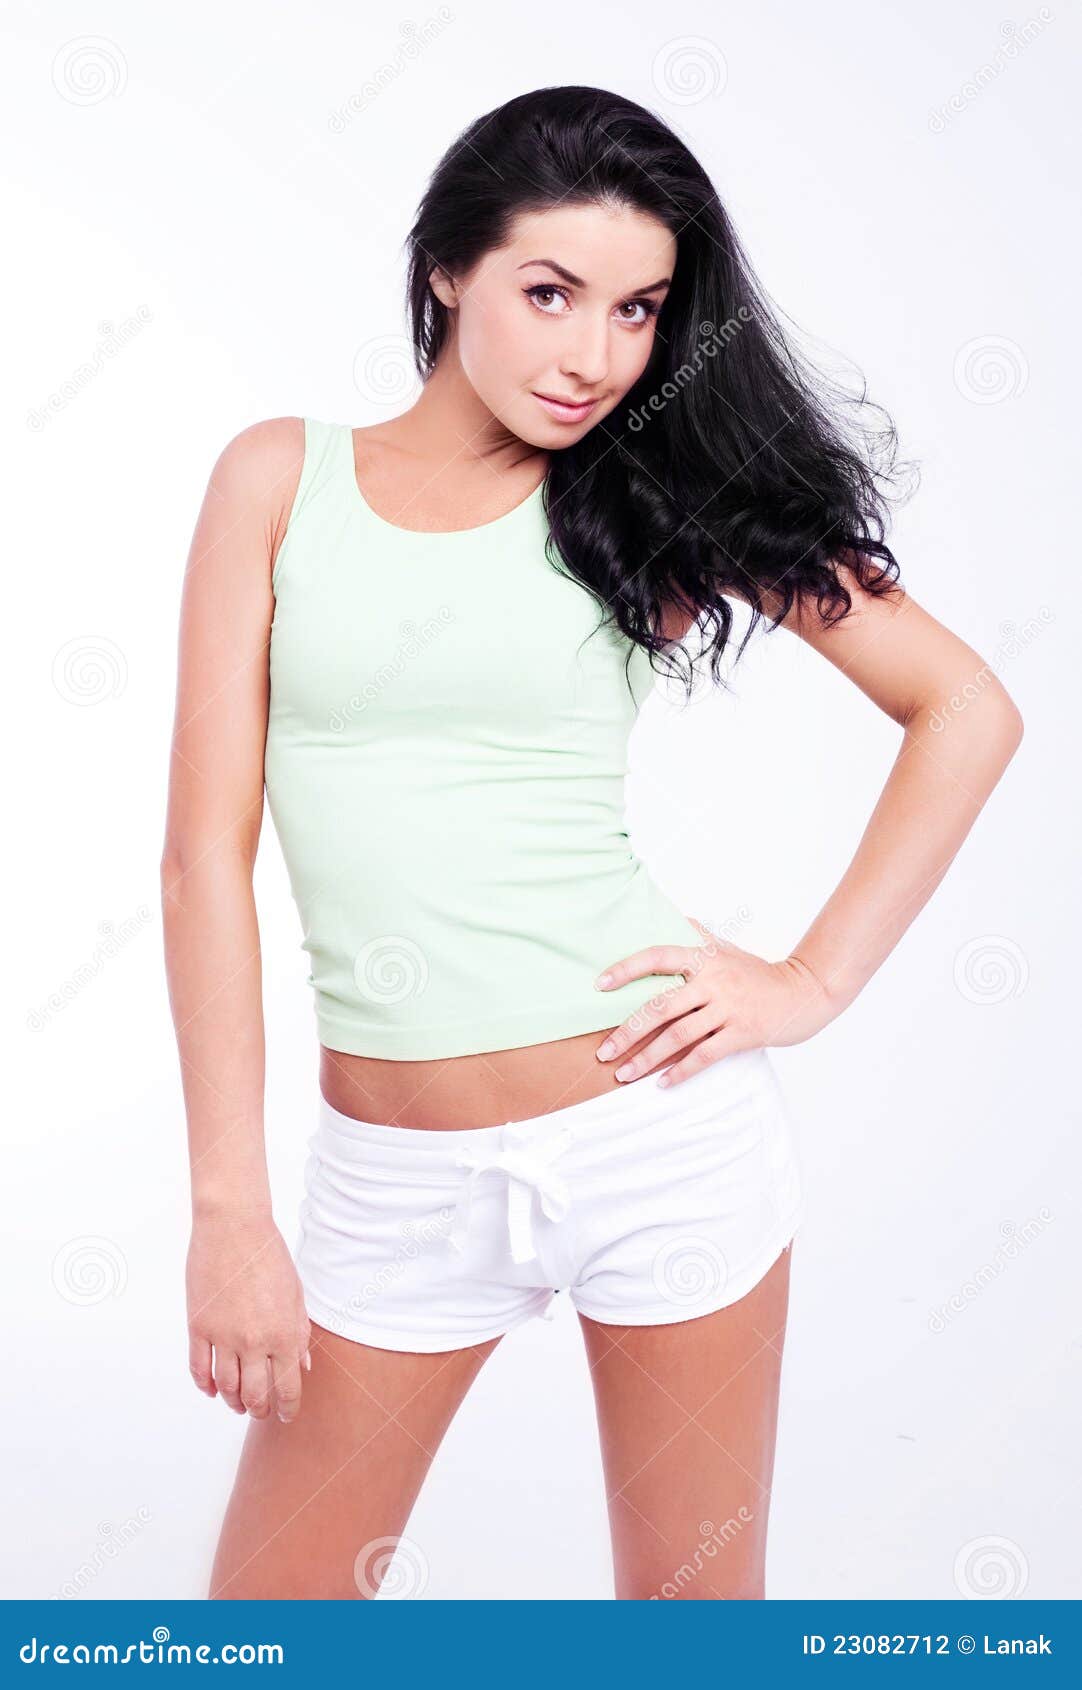 Slim woman stock photo. Image of model, casual, positive - 23082712